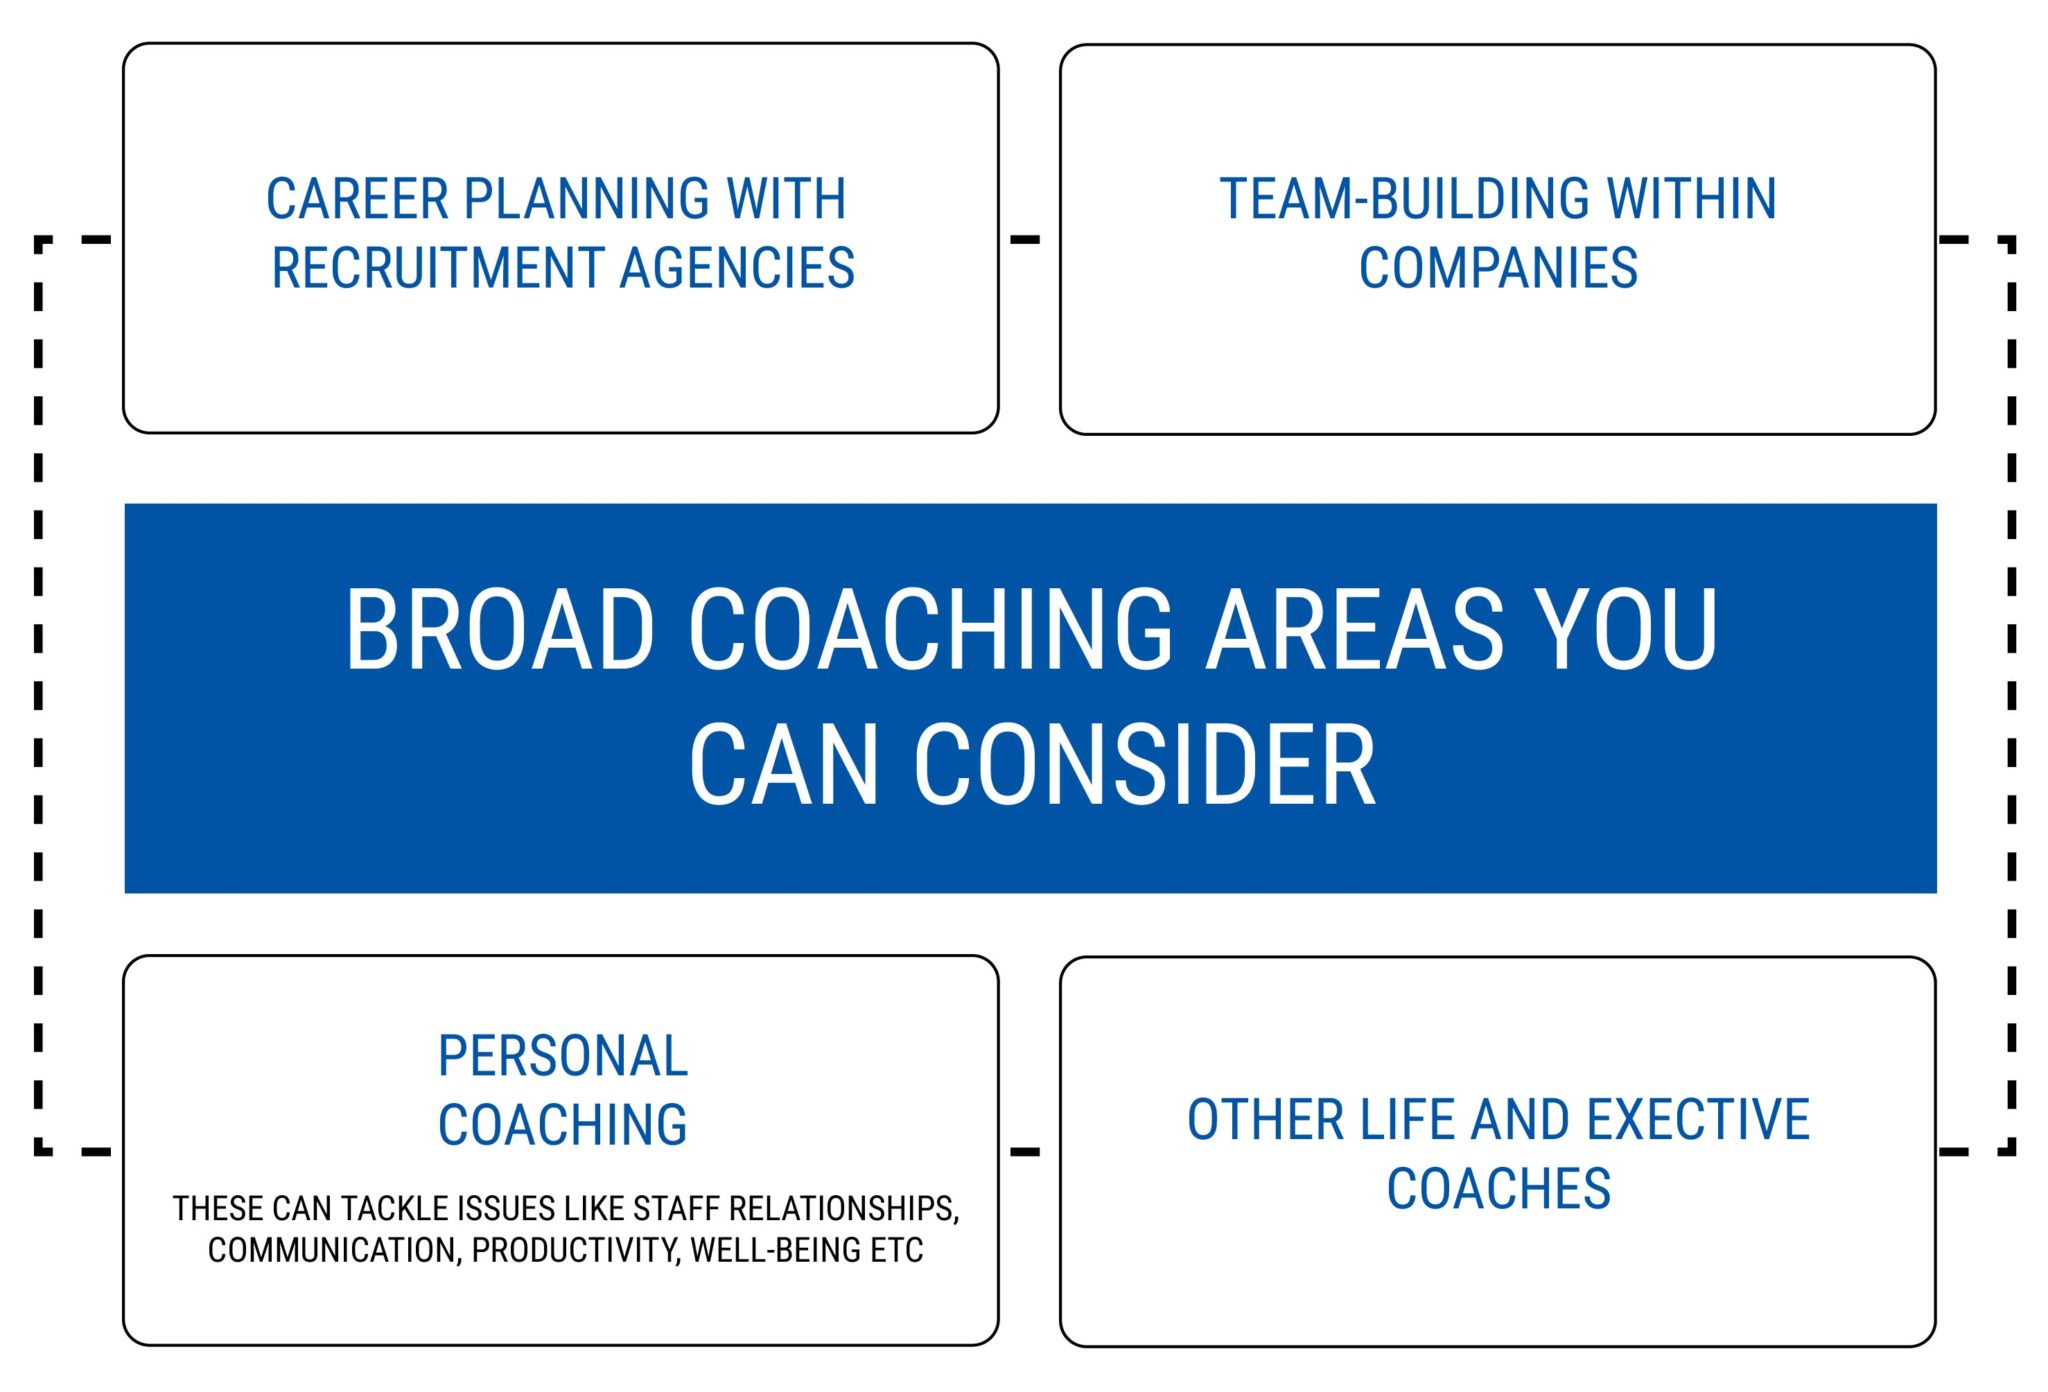 BROAD COACHING AREAS YOU CAN CONSIDER